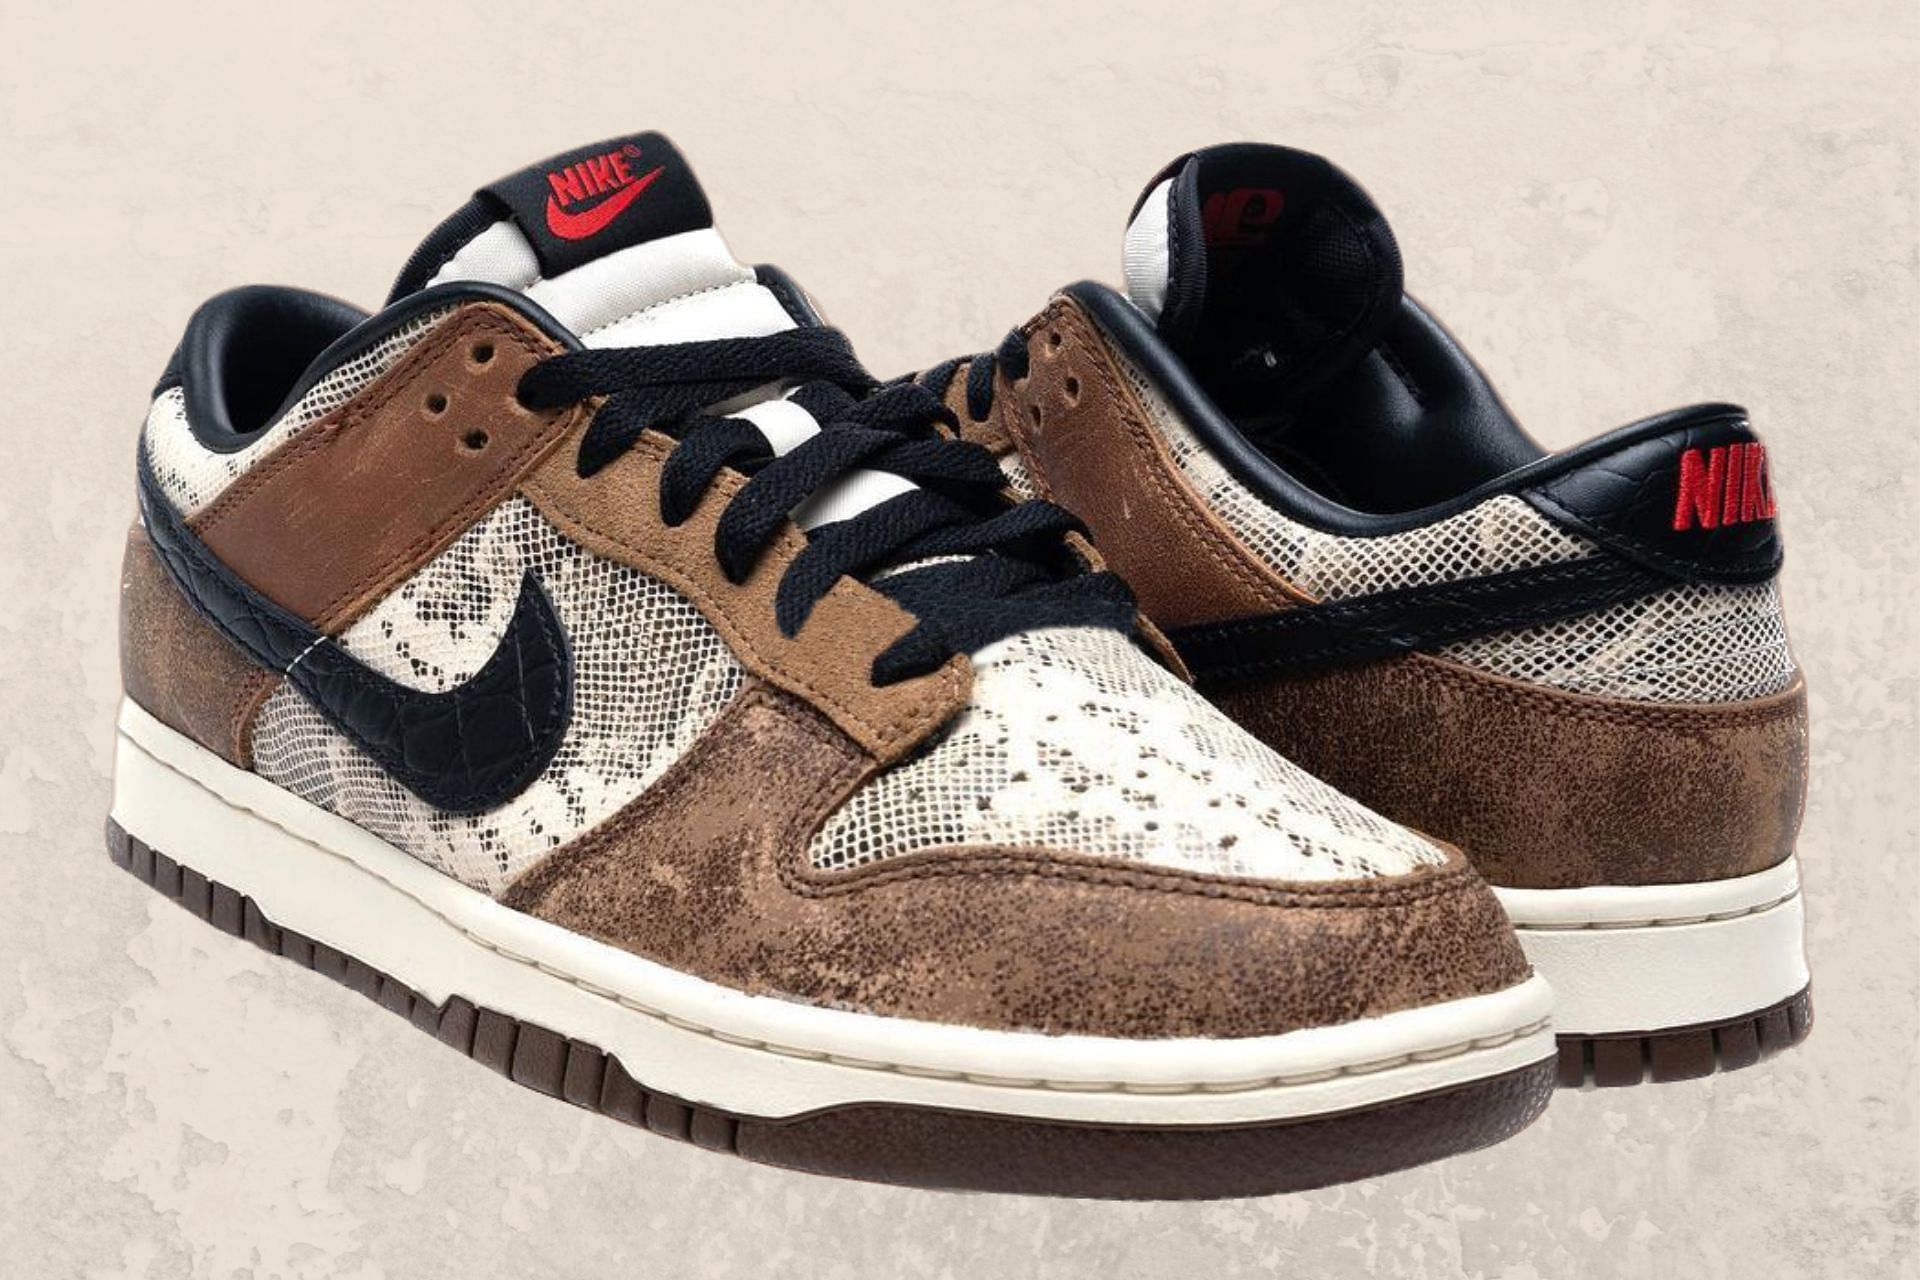 Hol Kenmerkend leeftijd CO.JP: Nike Dunk Low CO.JP "Brown Snakeskin" shoes: Where to buy, price,  and more details explored